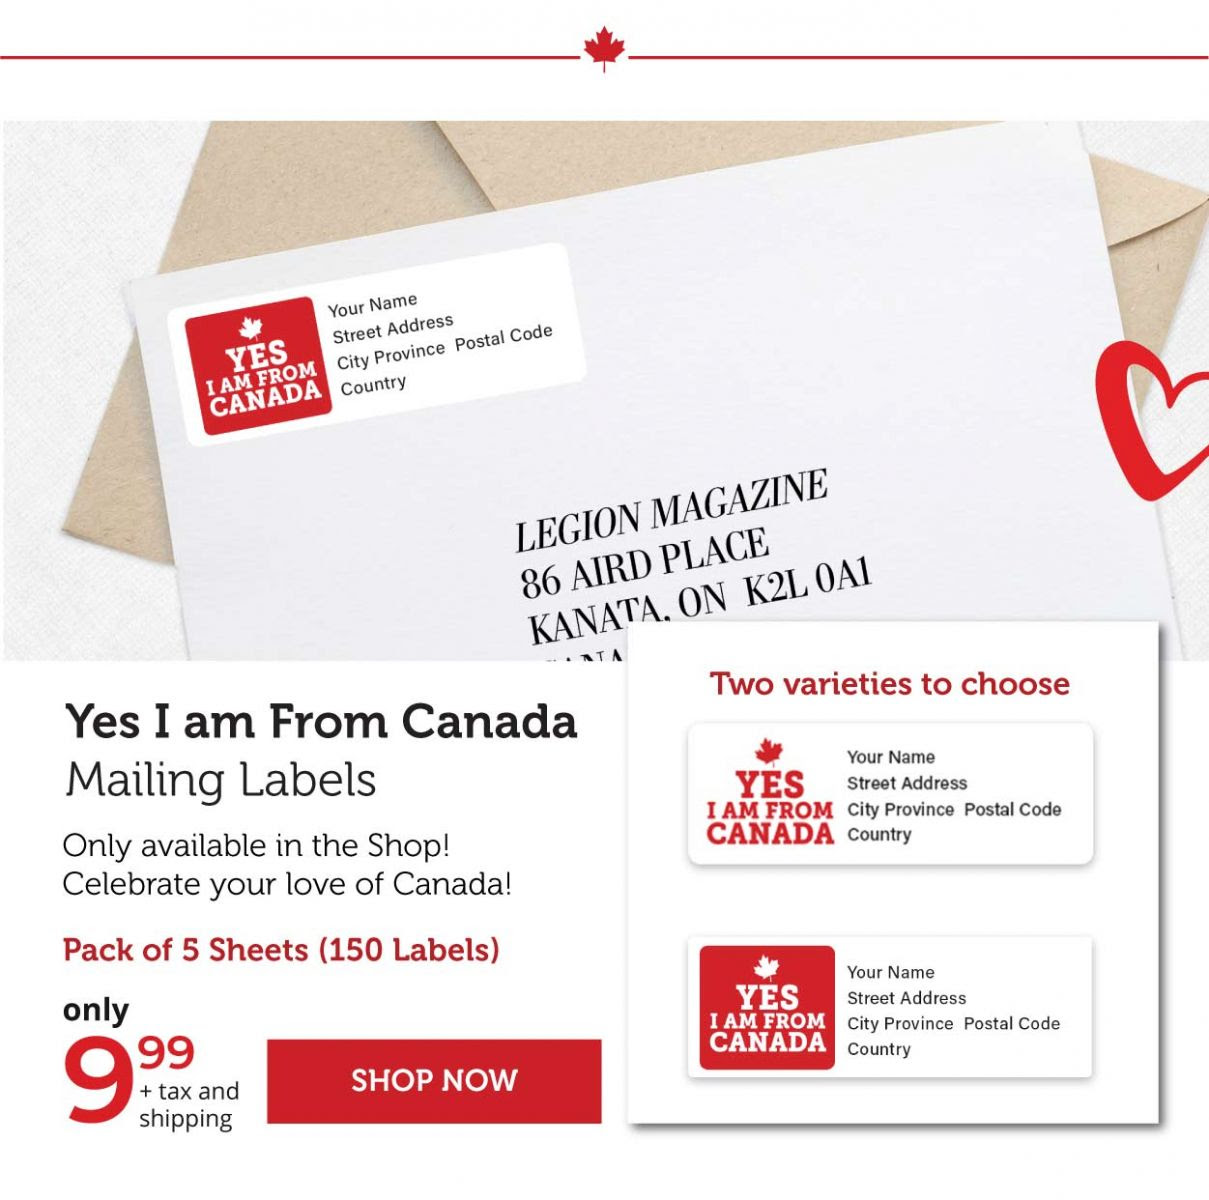 Yes I am From Canada Mailing Labels